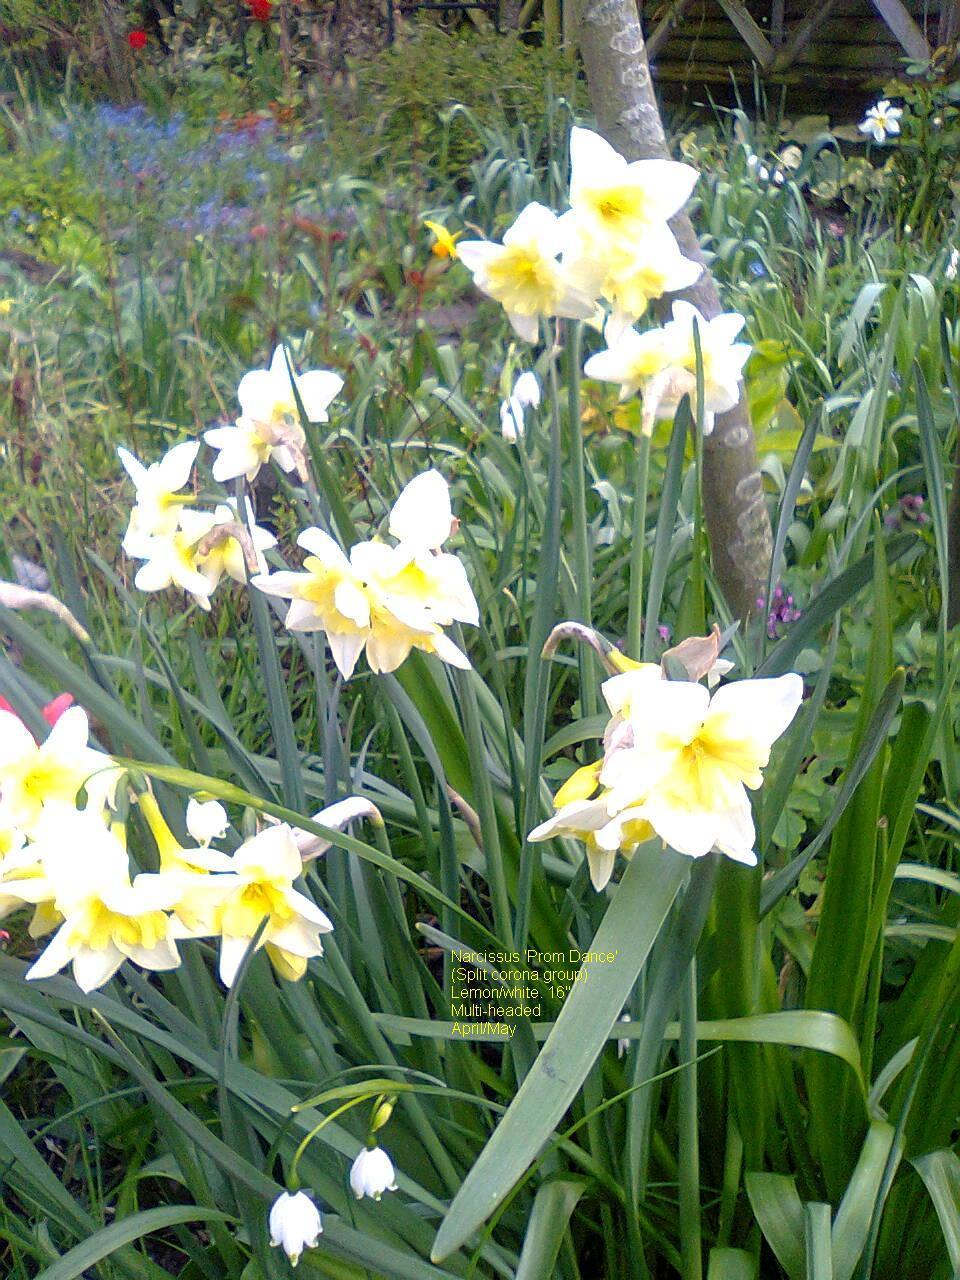 Photo of Split-Cupped Daffodil (Narcissus 'Prom Dance') uploaded by pjnew